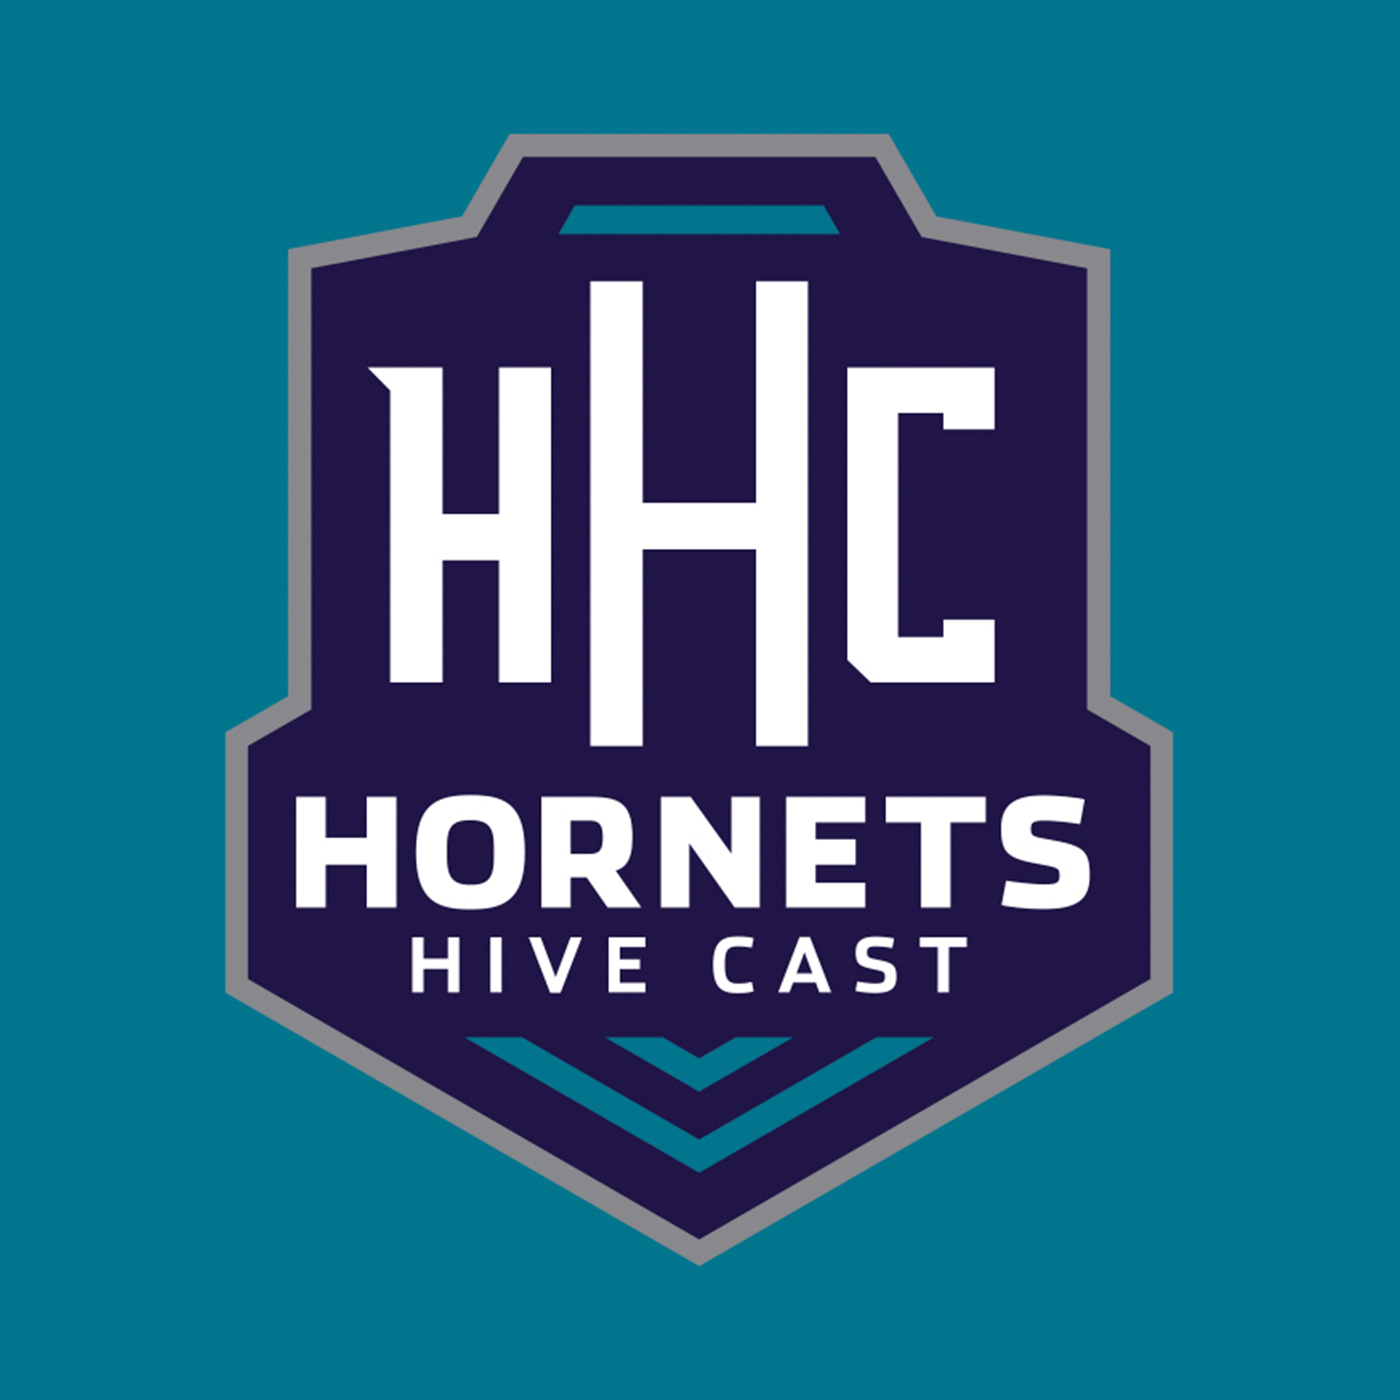 10-29-23 - New Hornets Owners Rick Schnall & Gabe Plotkin